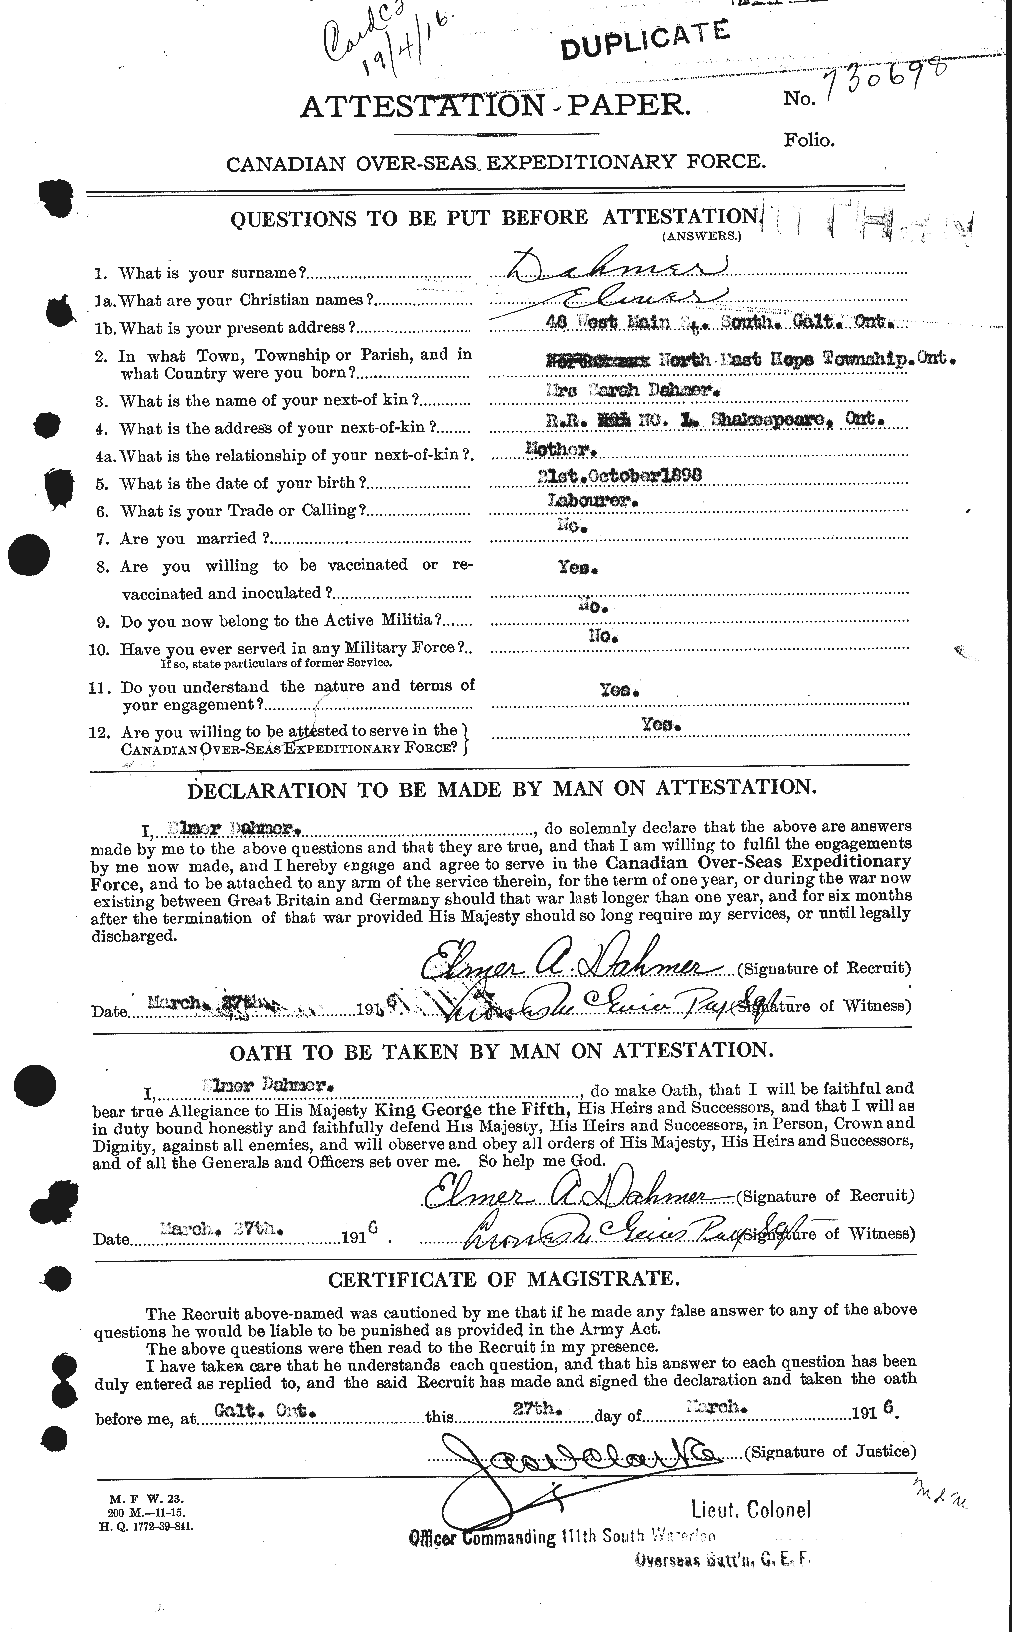 Personnel Records of the First World War - CEF 280821a